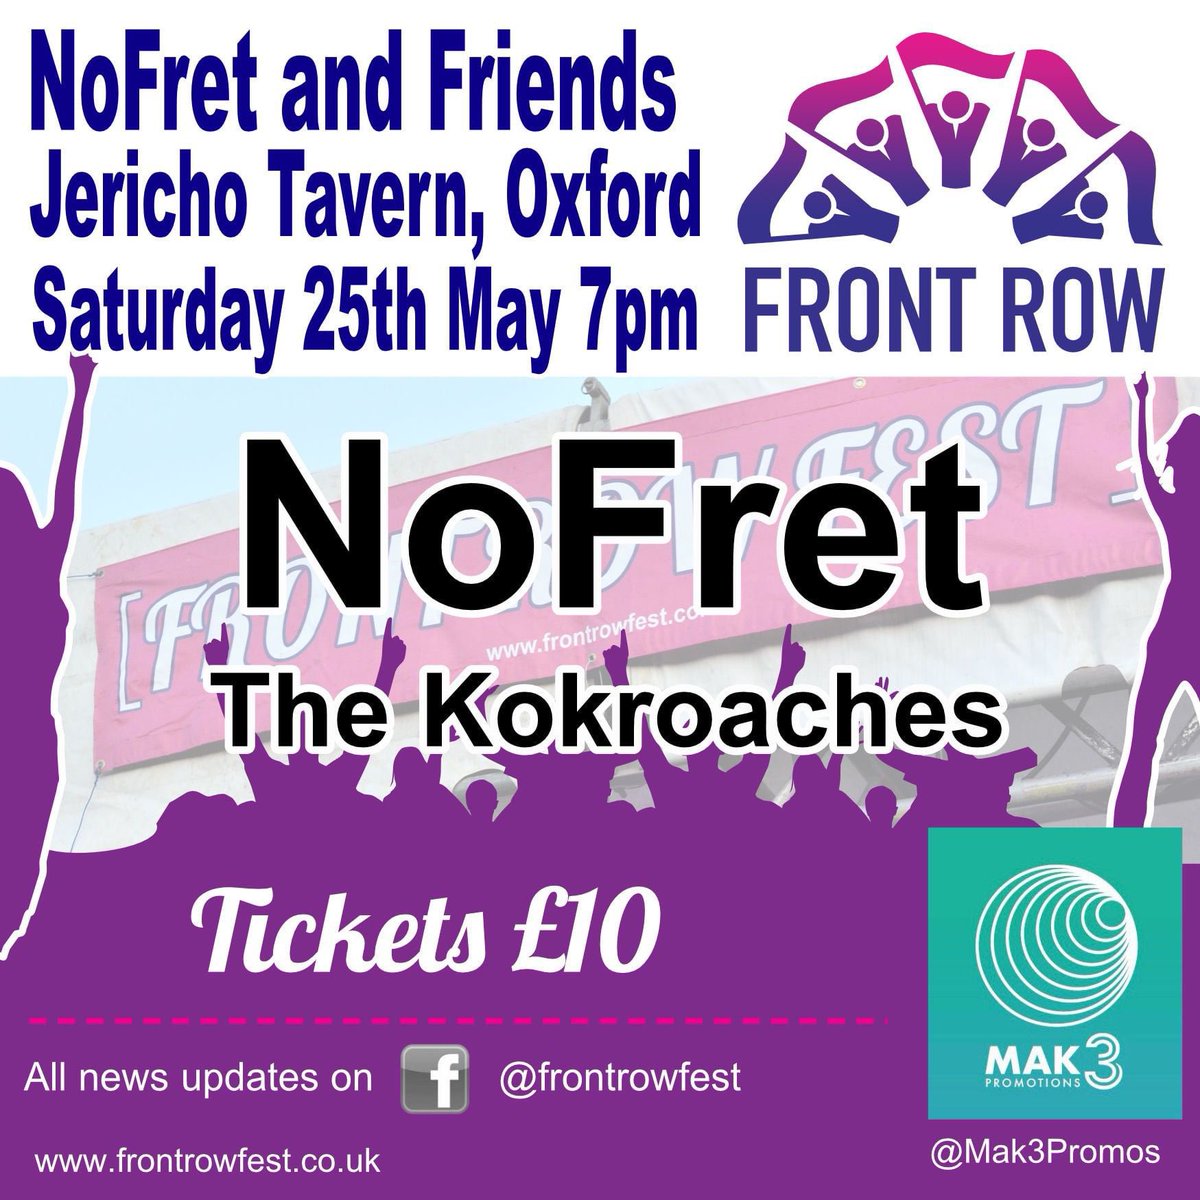 Saturday night sees @NofretBand and @TKokroachez take to the @TheJerichoTav stage 😀 Tickets are still available ⬇️ I know @saintsman61 and I are v proud to have both! And would love to see this sell out for these two upcoming Oxford bands, so any shares would be welcome 💛💙🎶